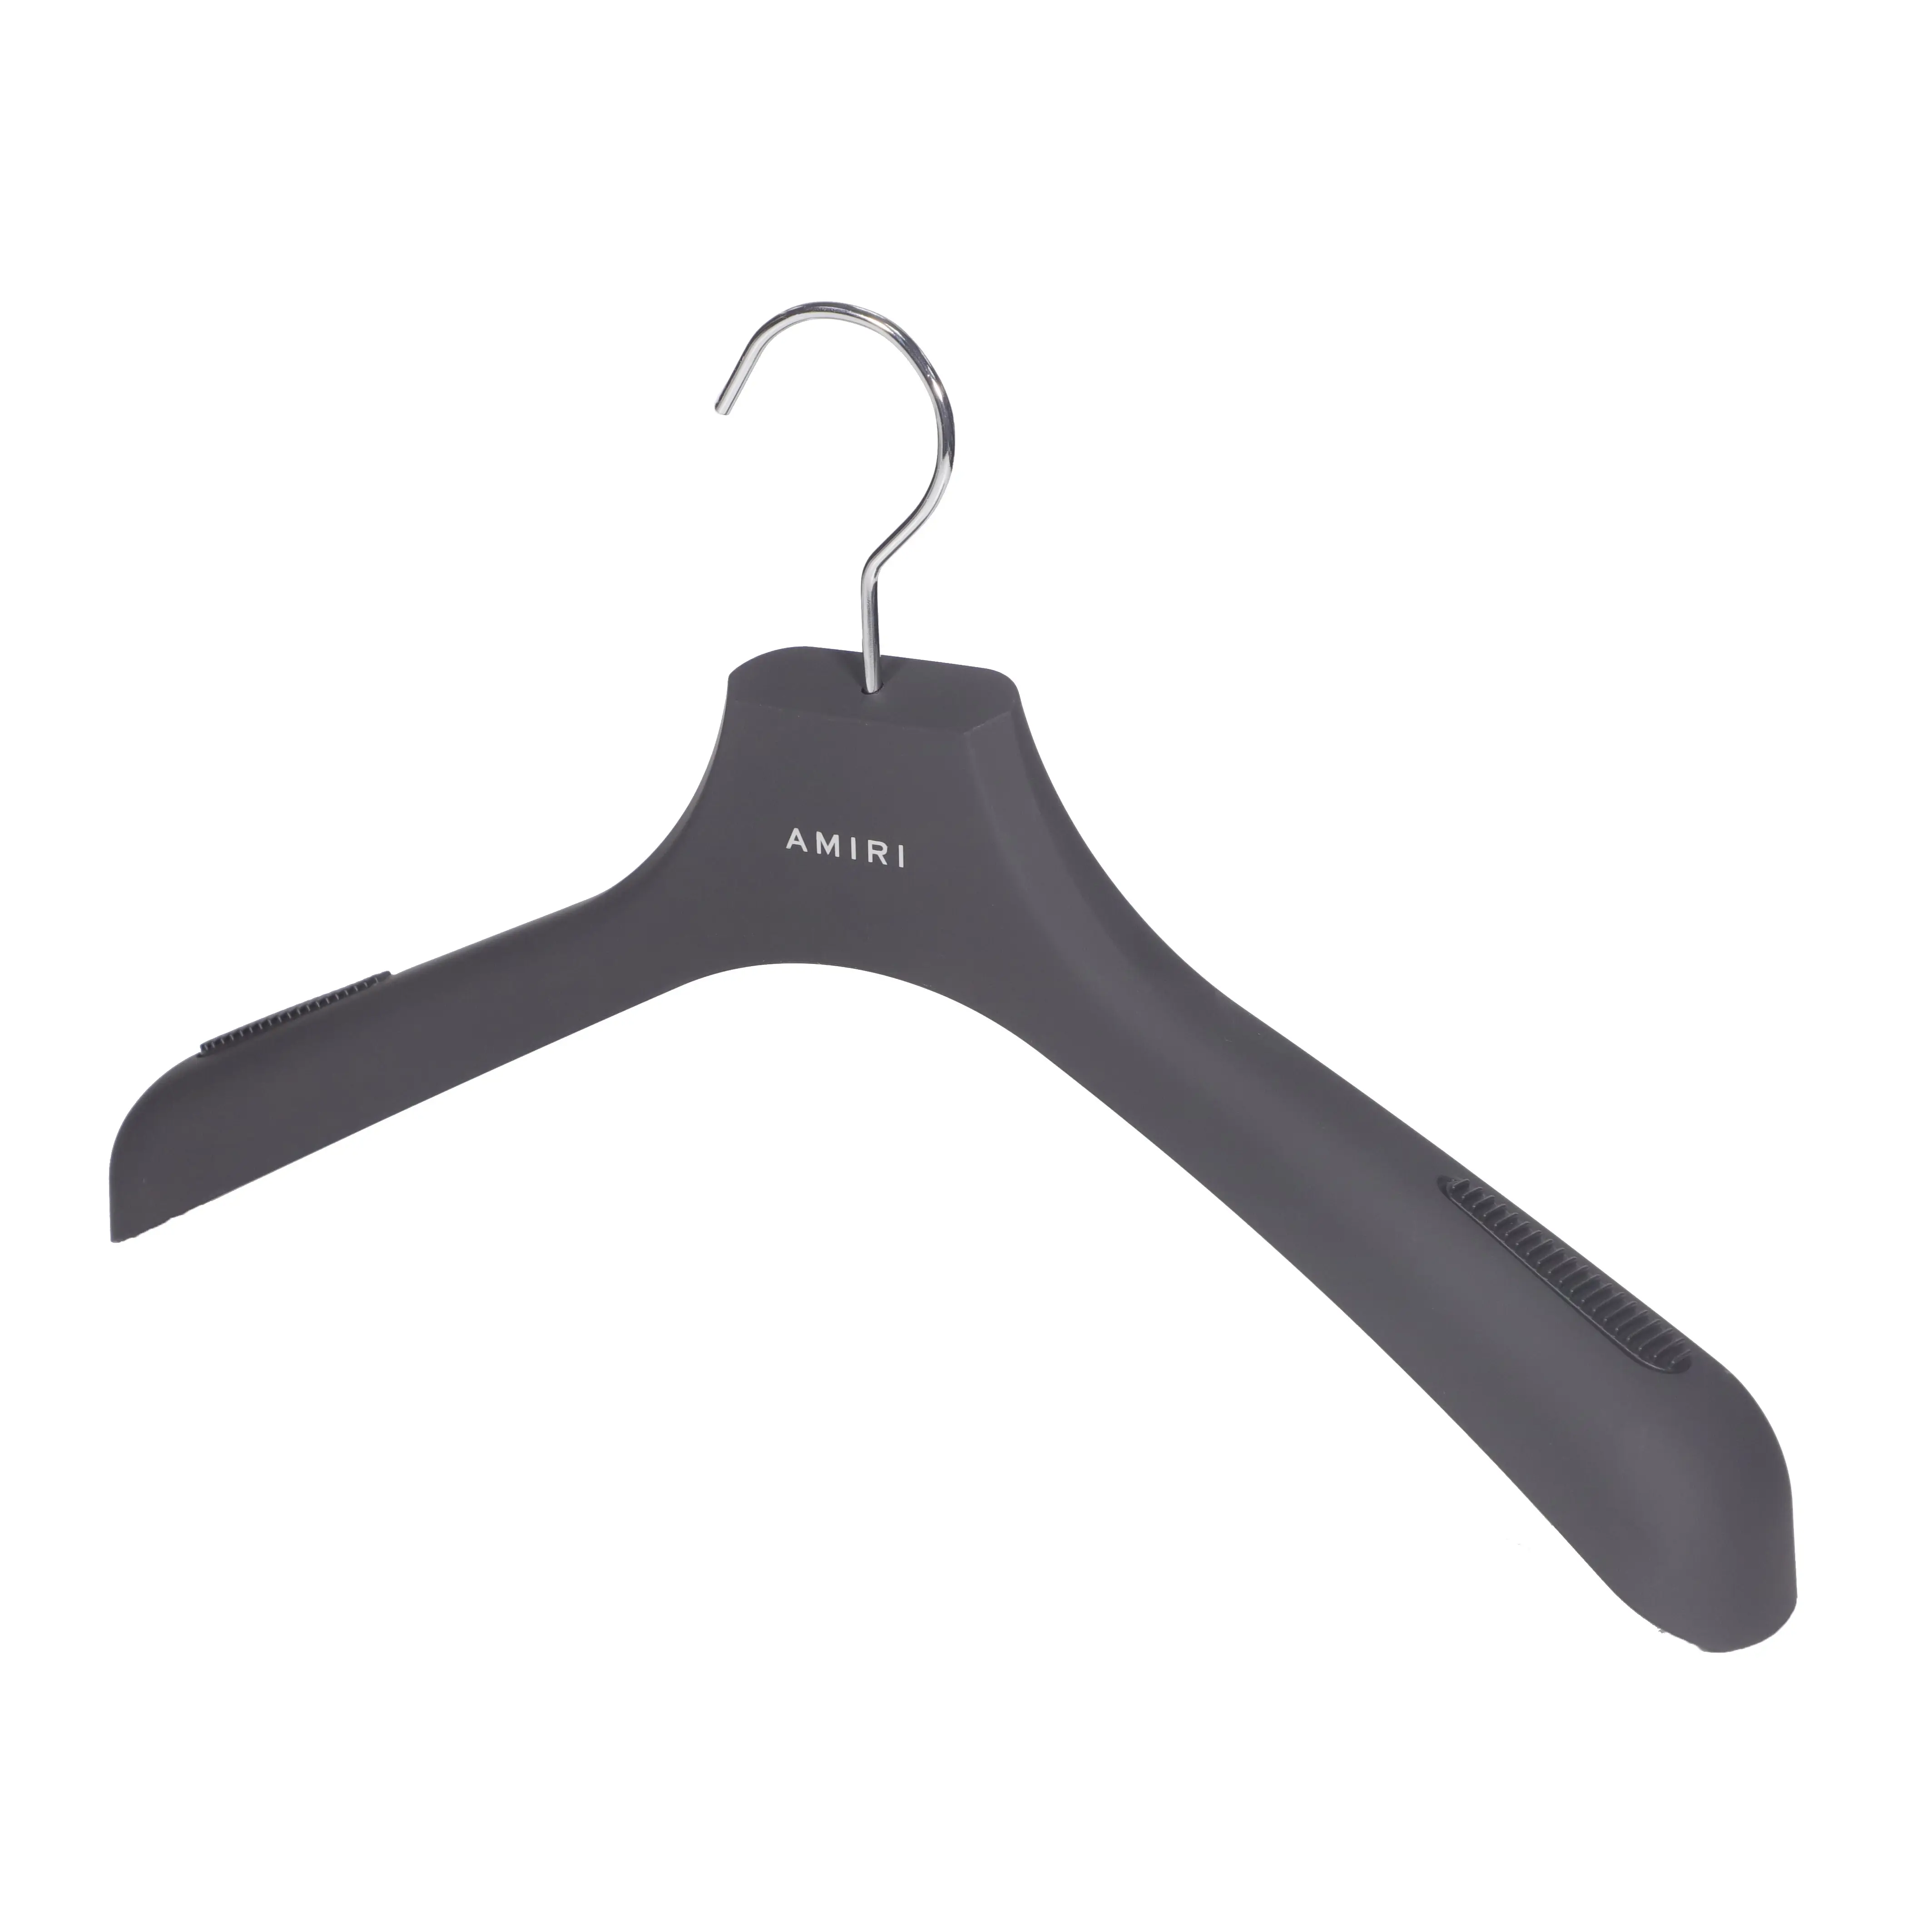 Classic style rubber coated plastic suits and coat hanger